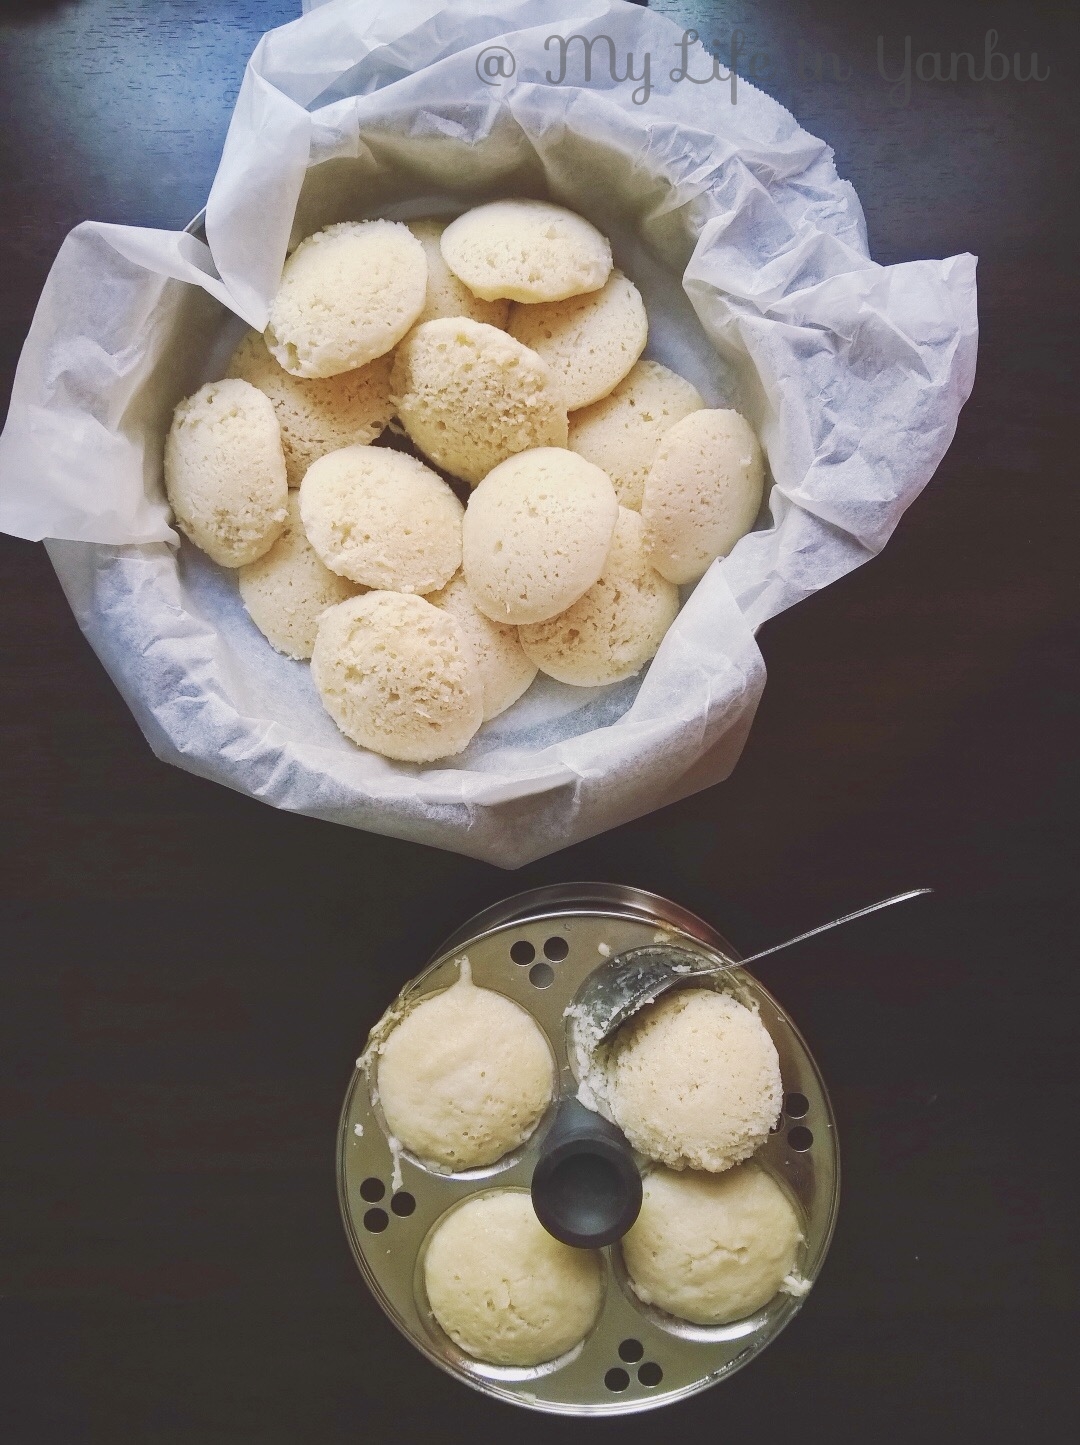 a bowl of freshly made idlis along with idlis in the mold